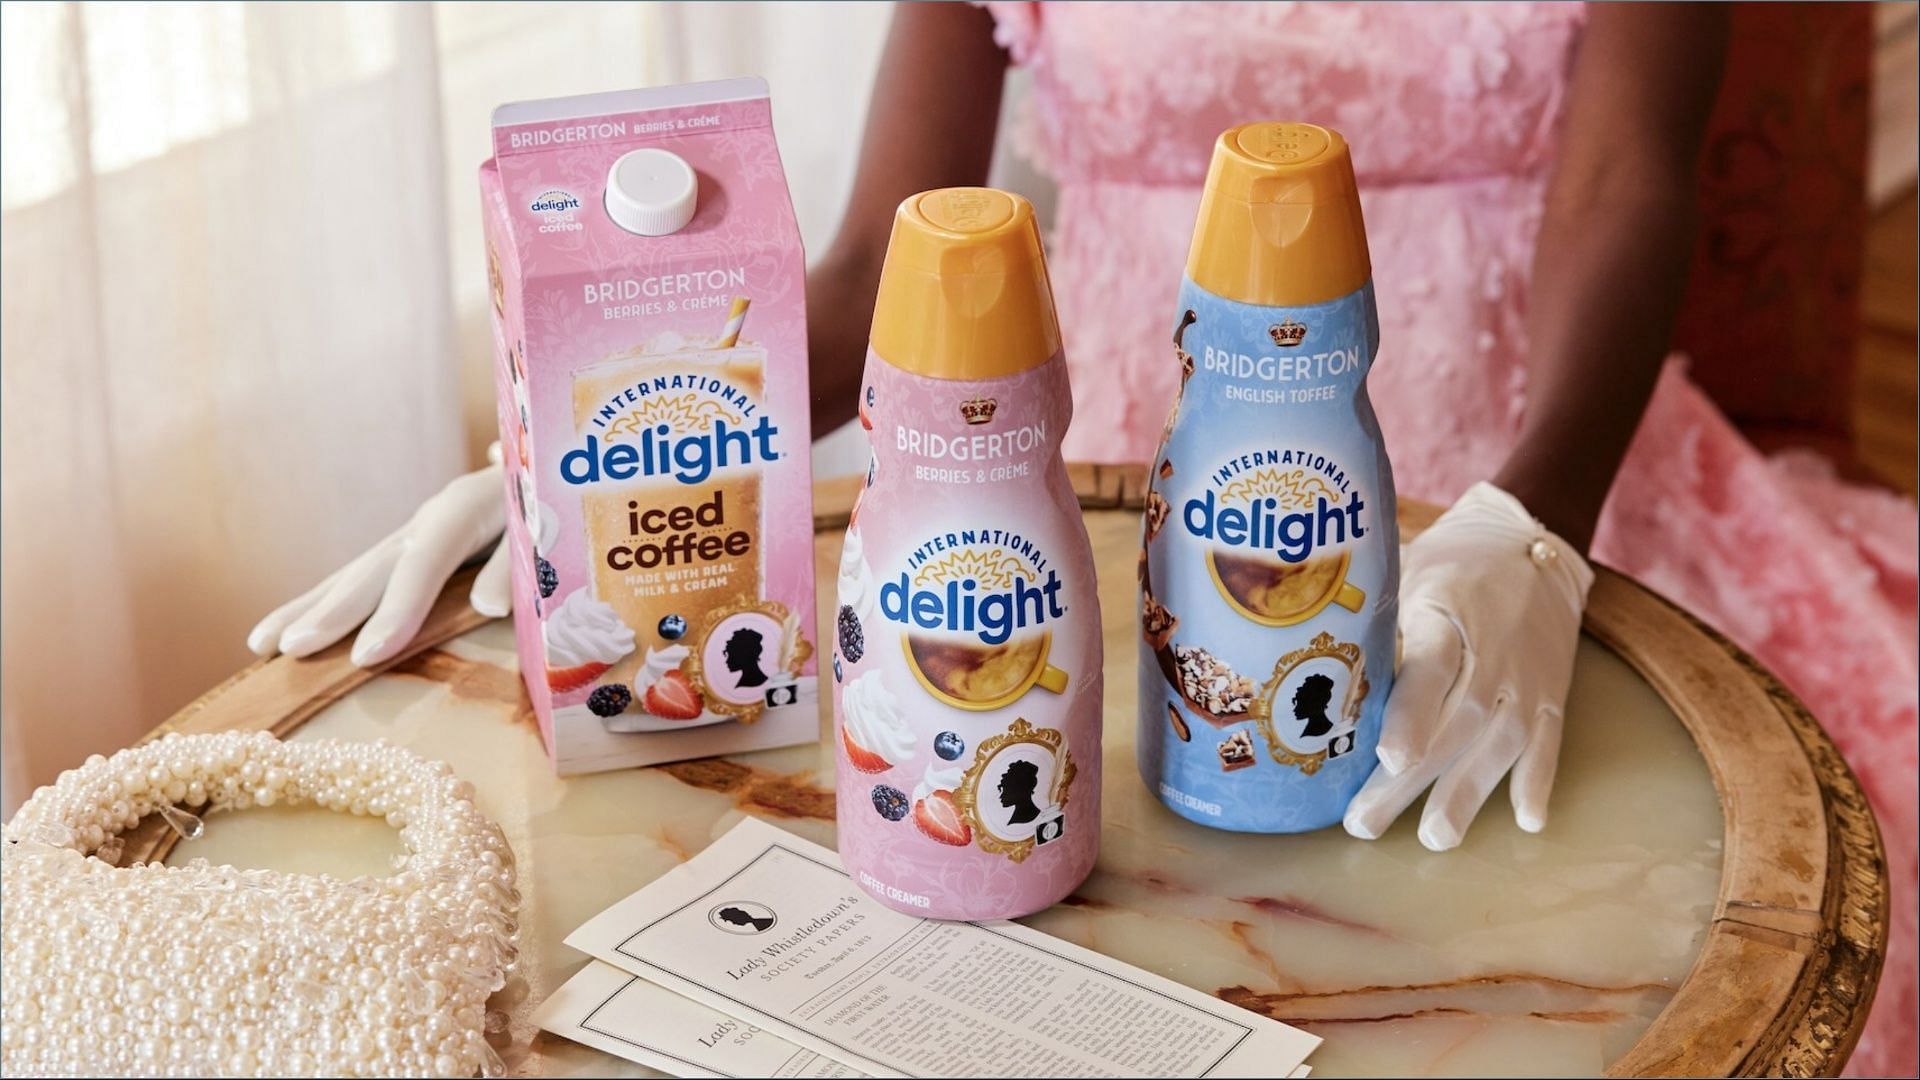 International Delight&#039;s new Bridgerton-inspired coffee and creamers hit stores by the end of December (Image via International Delight)